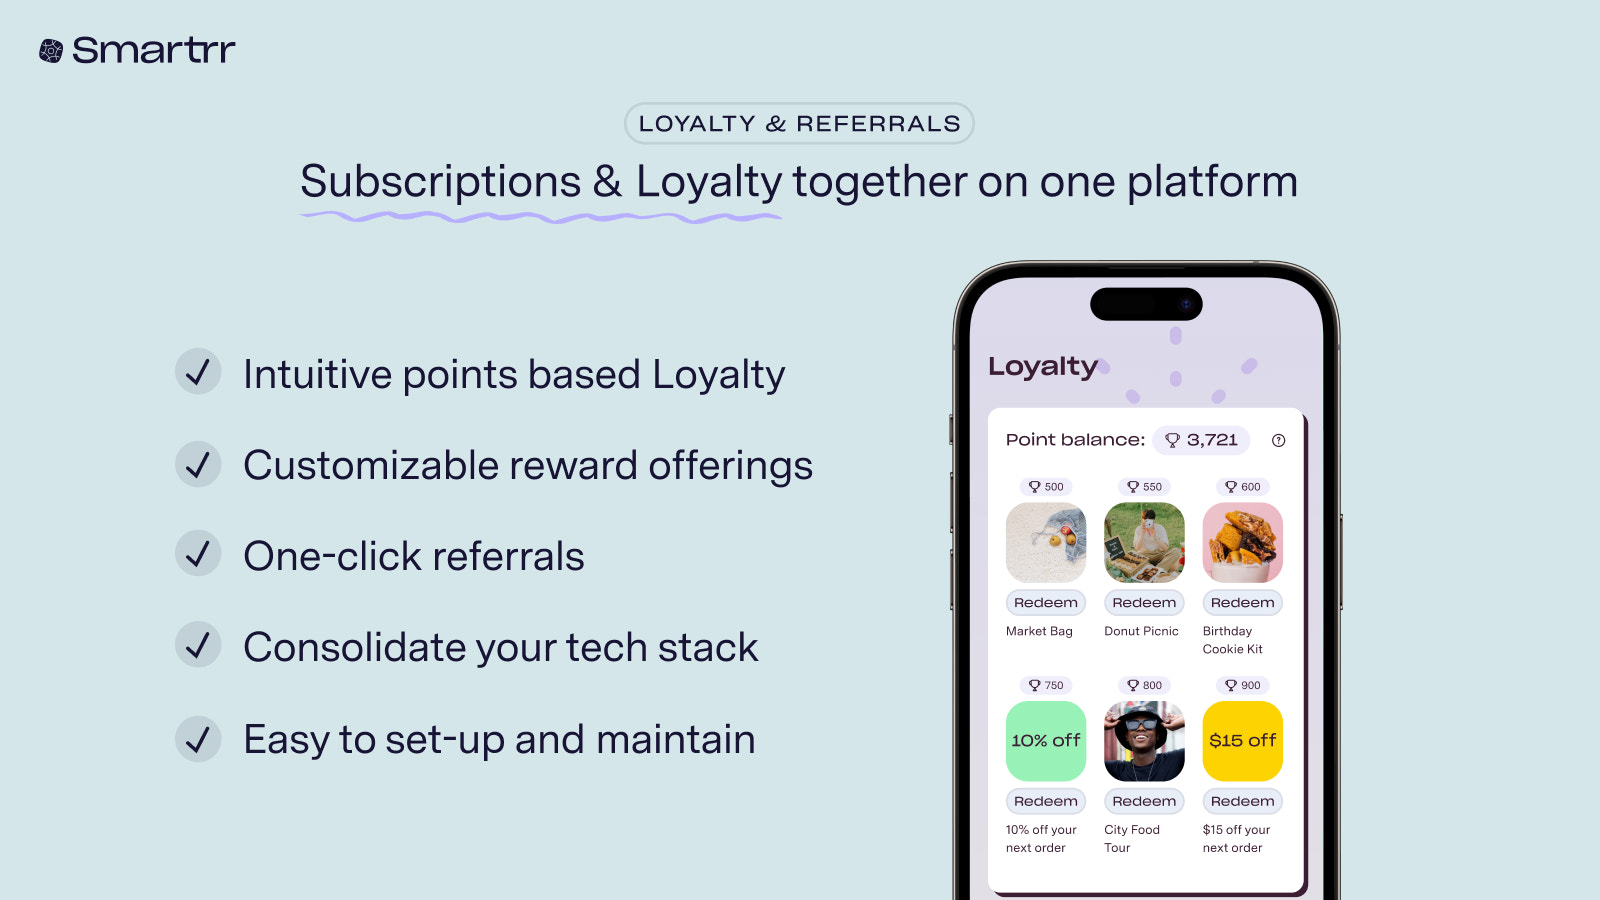 Smartrr has the tools to build powerful loyalty programs